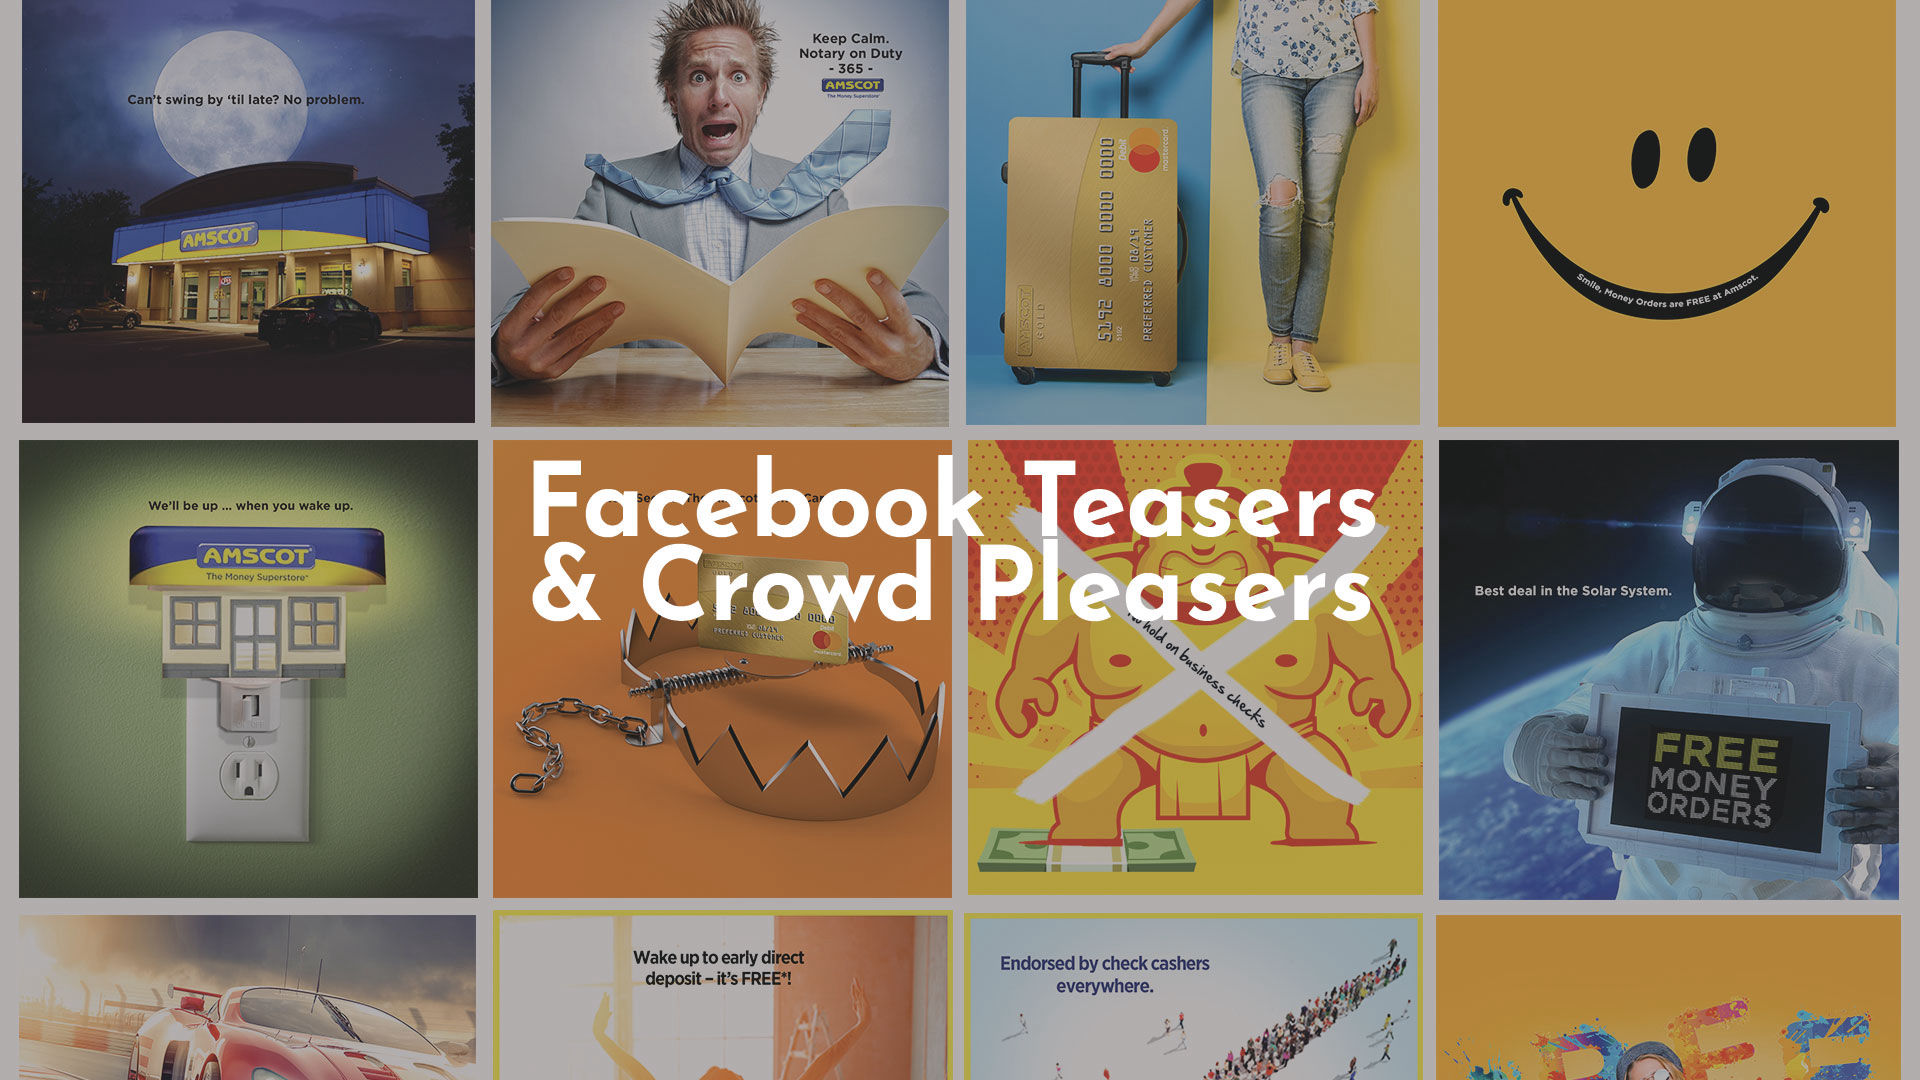 Facebook Teasers and Crowd Pleasers